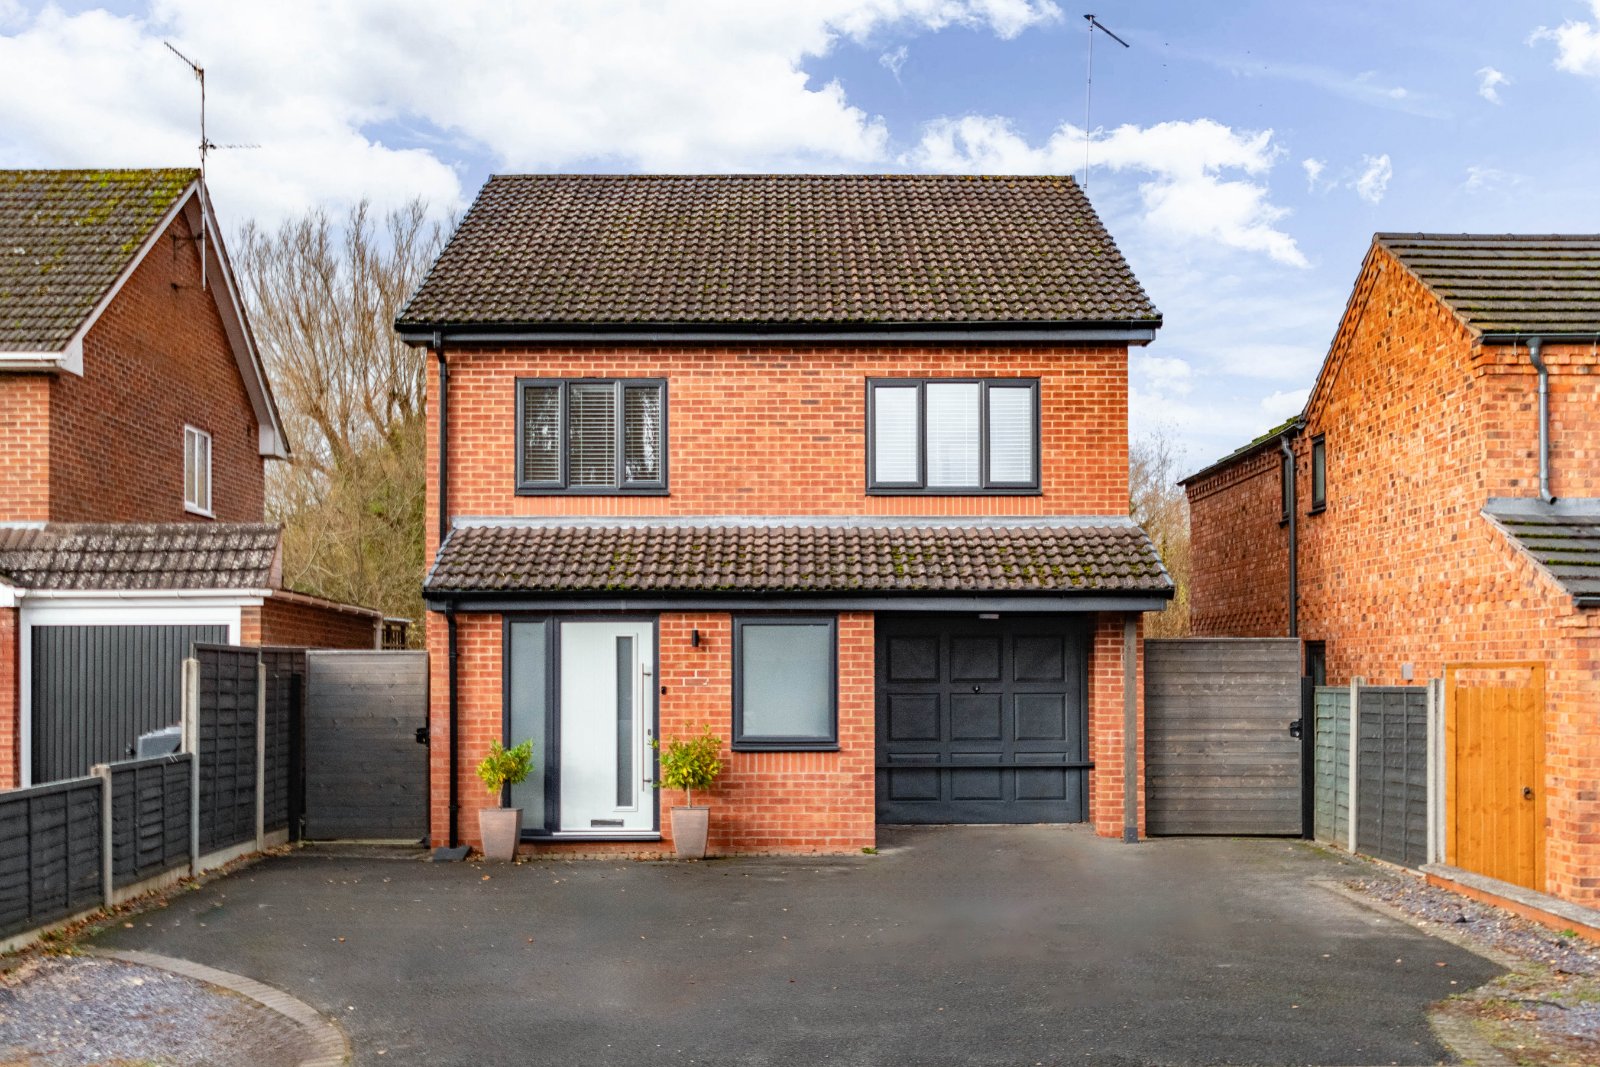 4 bed house for sale in Meadowcroft, Hagley  - Property Image 1